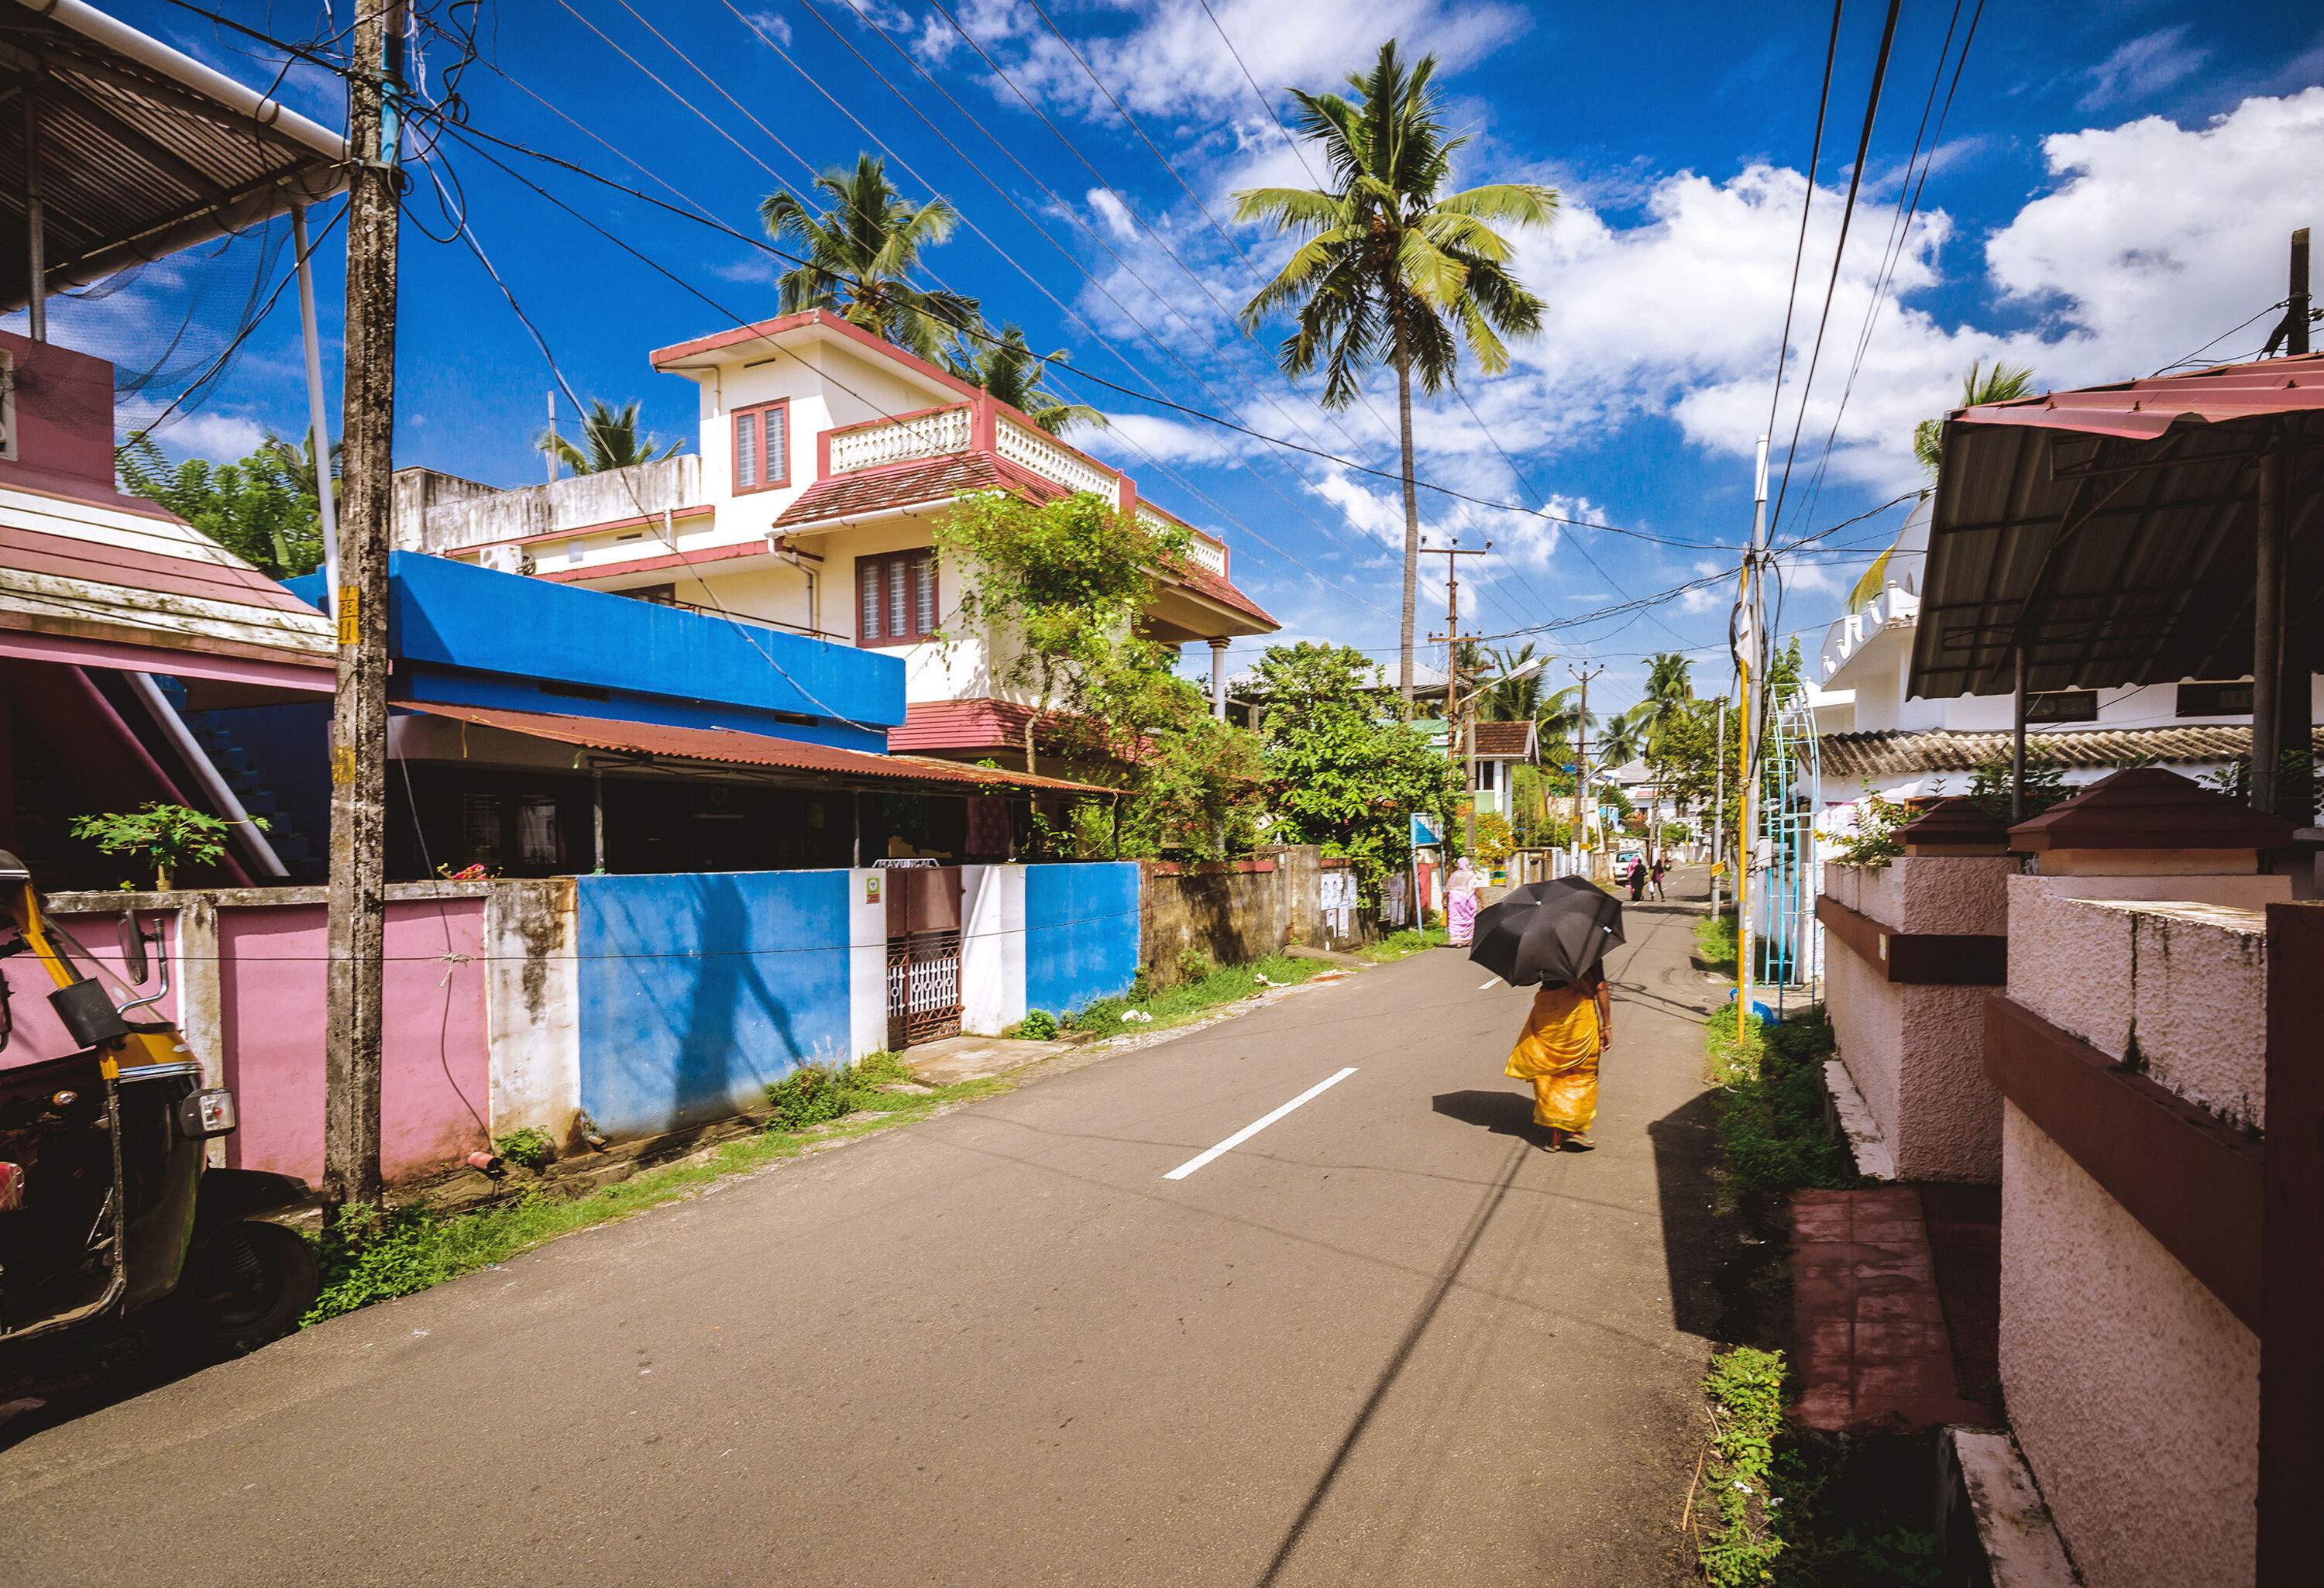 An individual walks on a street lined with traditional houses against the clear blue sky.